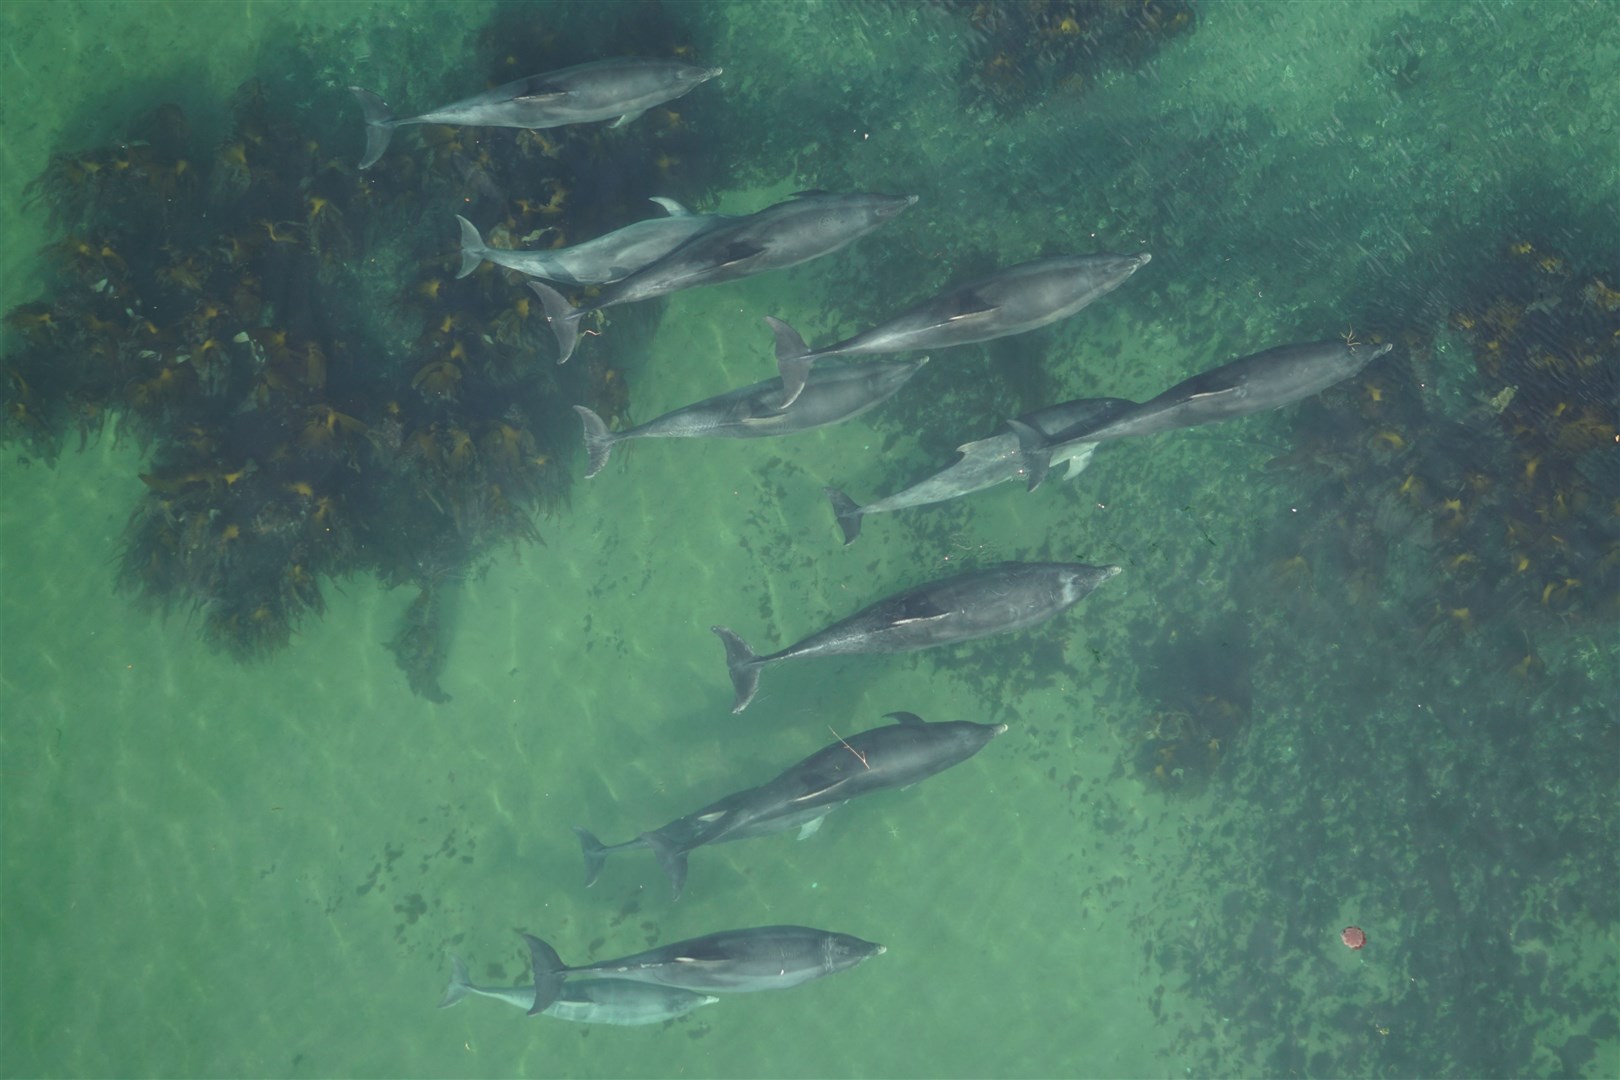 The aerial view of a pod of dolphins.